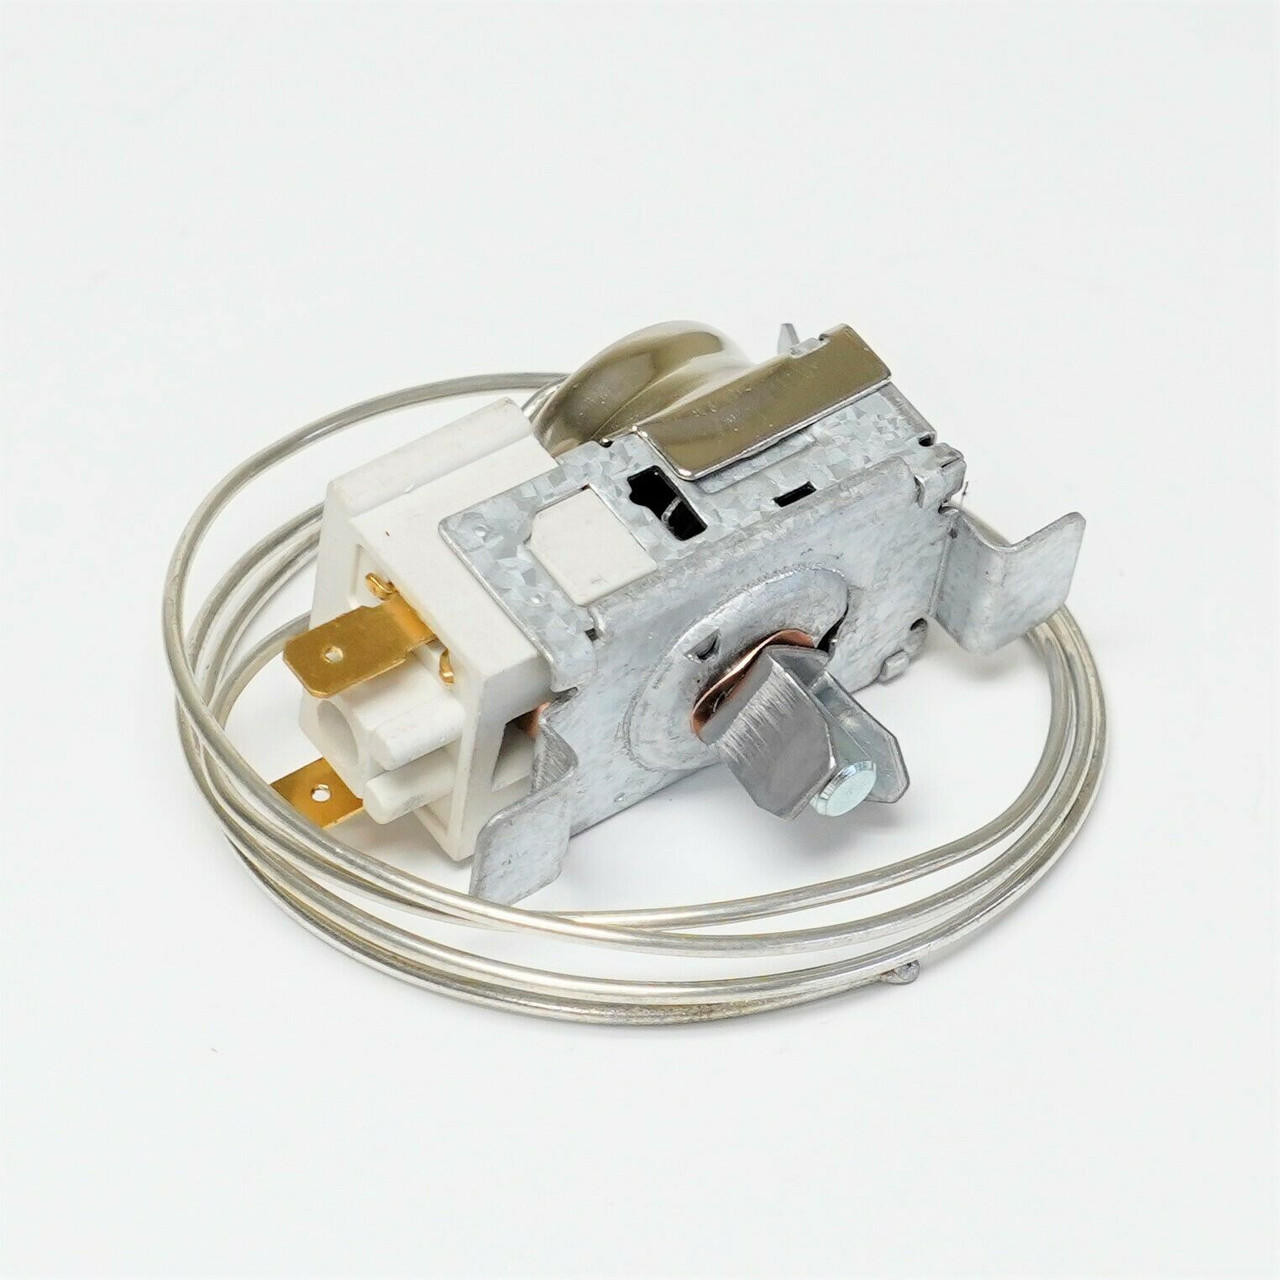 https://cdn11.bigcommerce.com/s-zrh8tkpr8d/images/stencil/1280x1280/products/7638/34880/replacement-5304421256-electrolux-frigidaire-refrigerator-thermostat-control__20891.1697238456.jpg?c=2